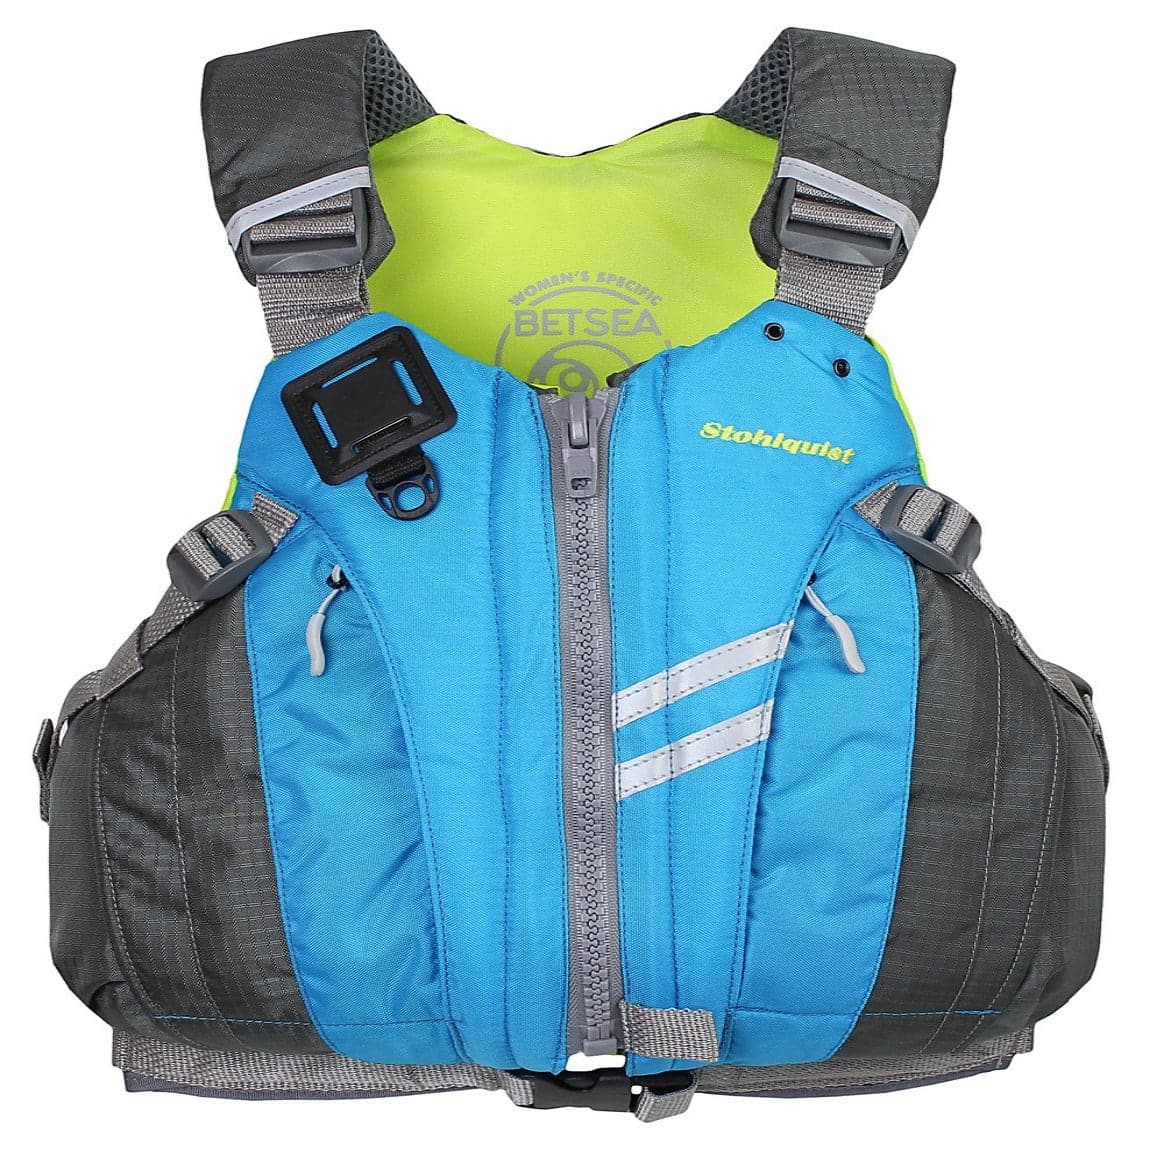 Featuring the BetSEA Women's PFD gift for kayaker, women's pfd manufactured by Stohlquist shown here from a second angle.